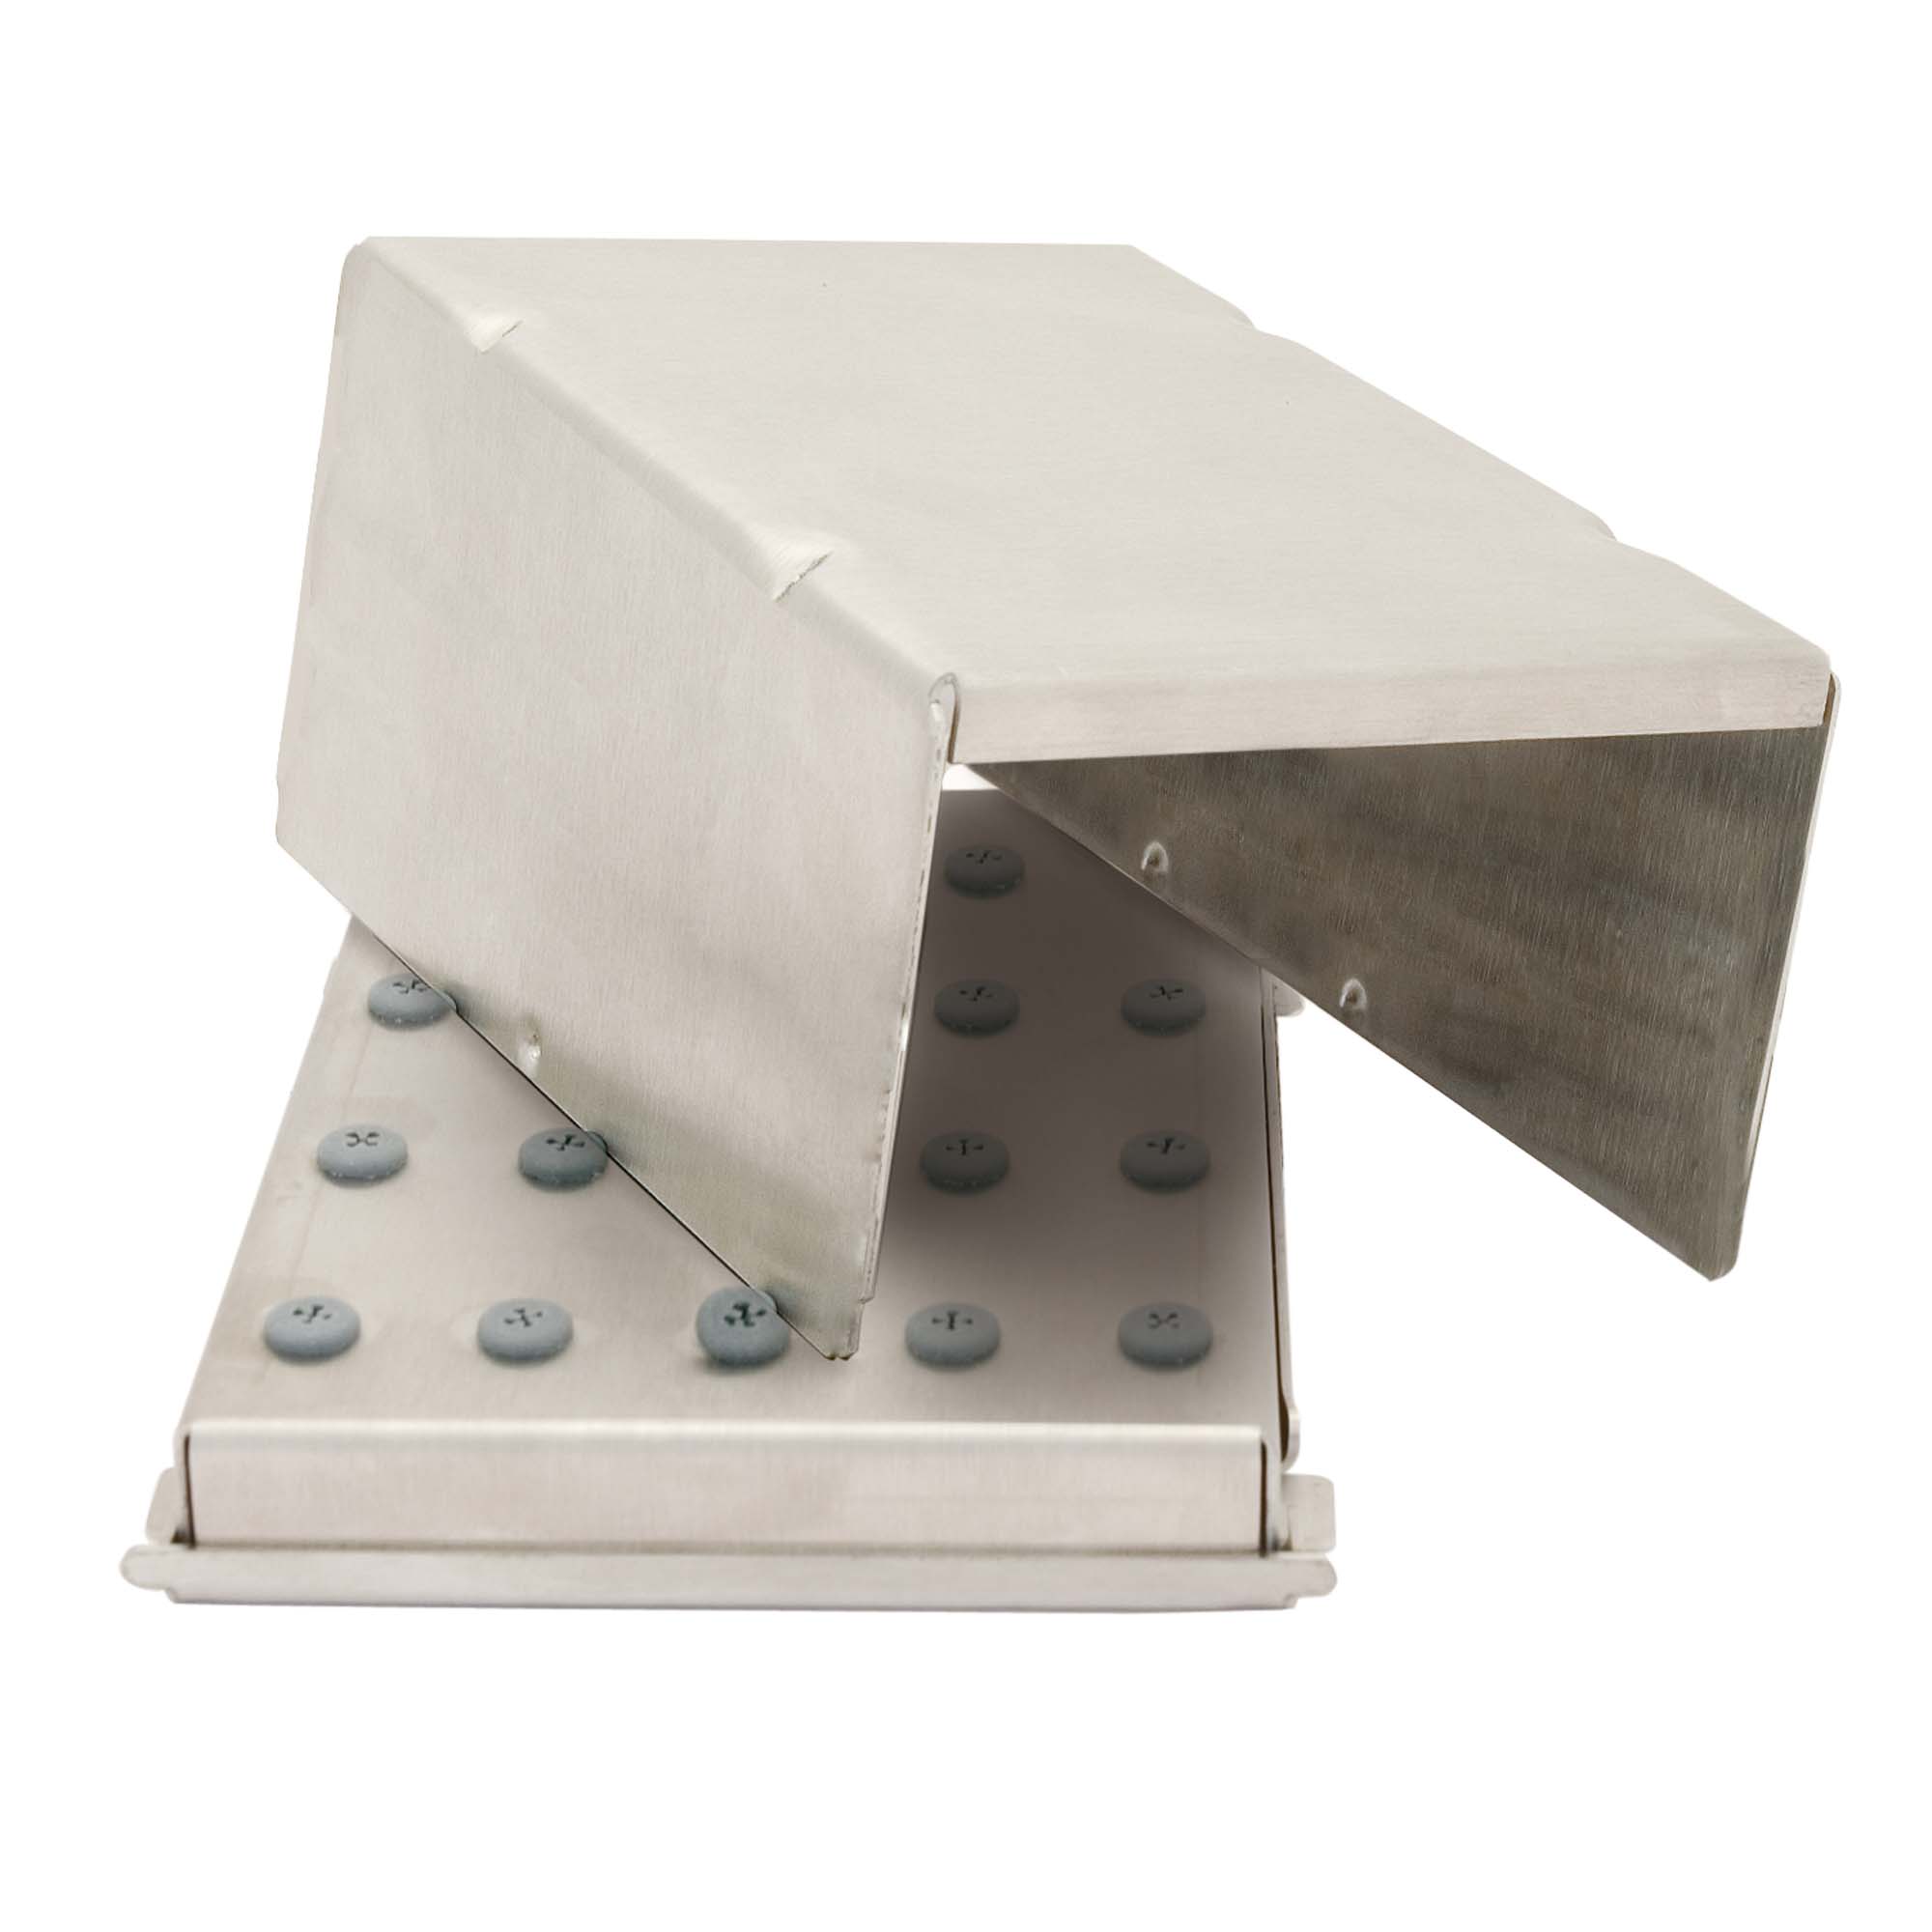 BS170 Bur Block, Stainless Steel with Grommets, 20 RA or 20FG or 20HP, Non-Corrosive, Sterilizable